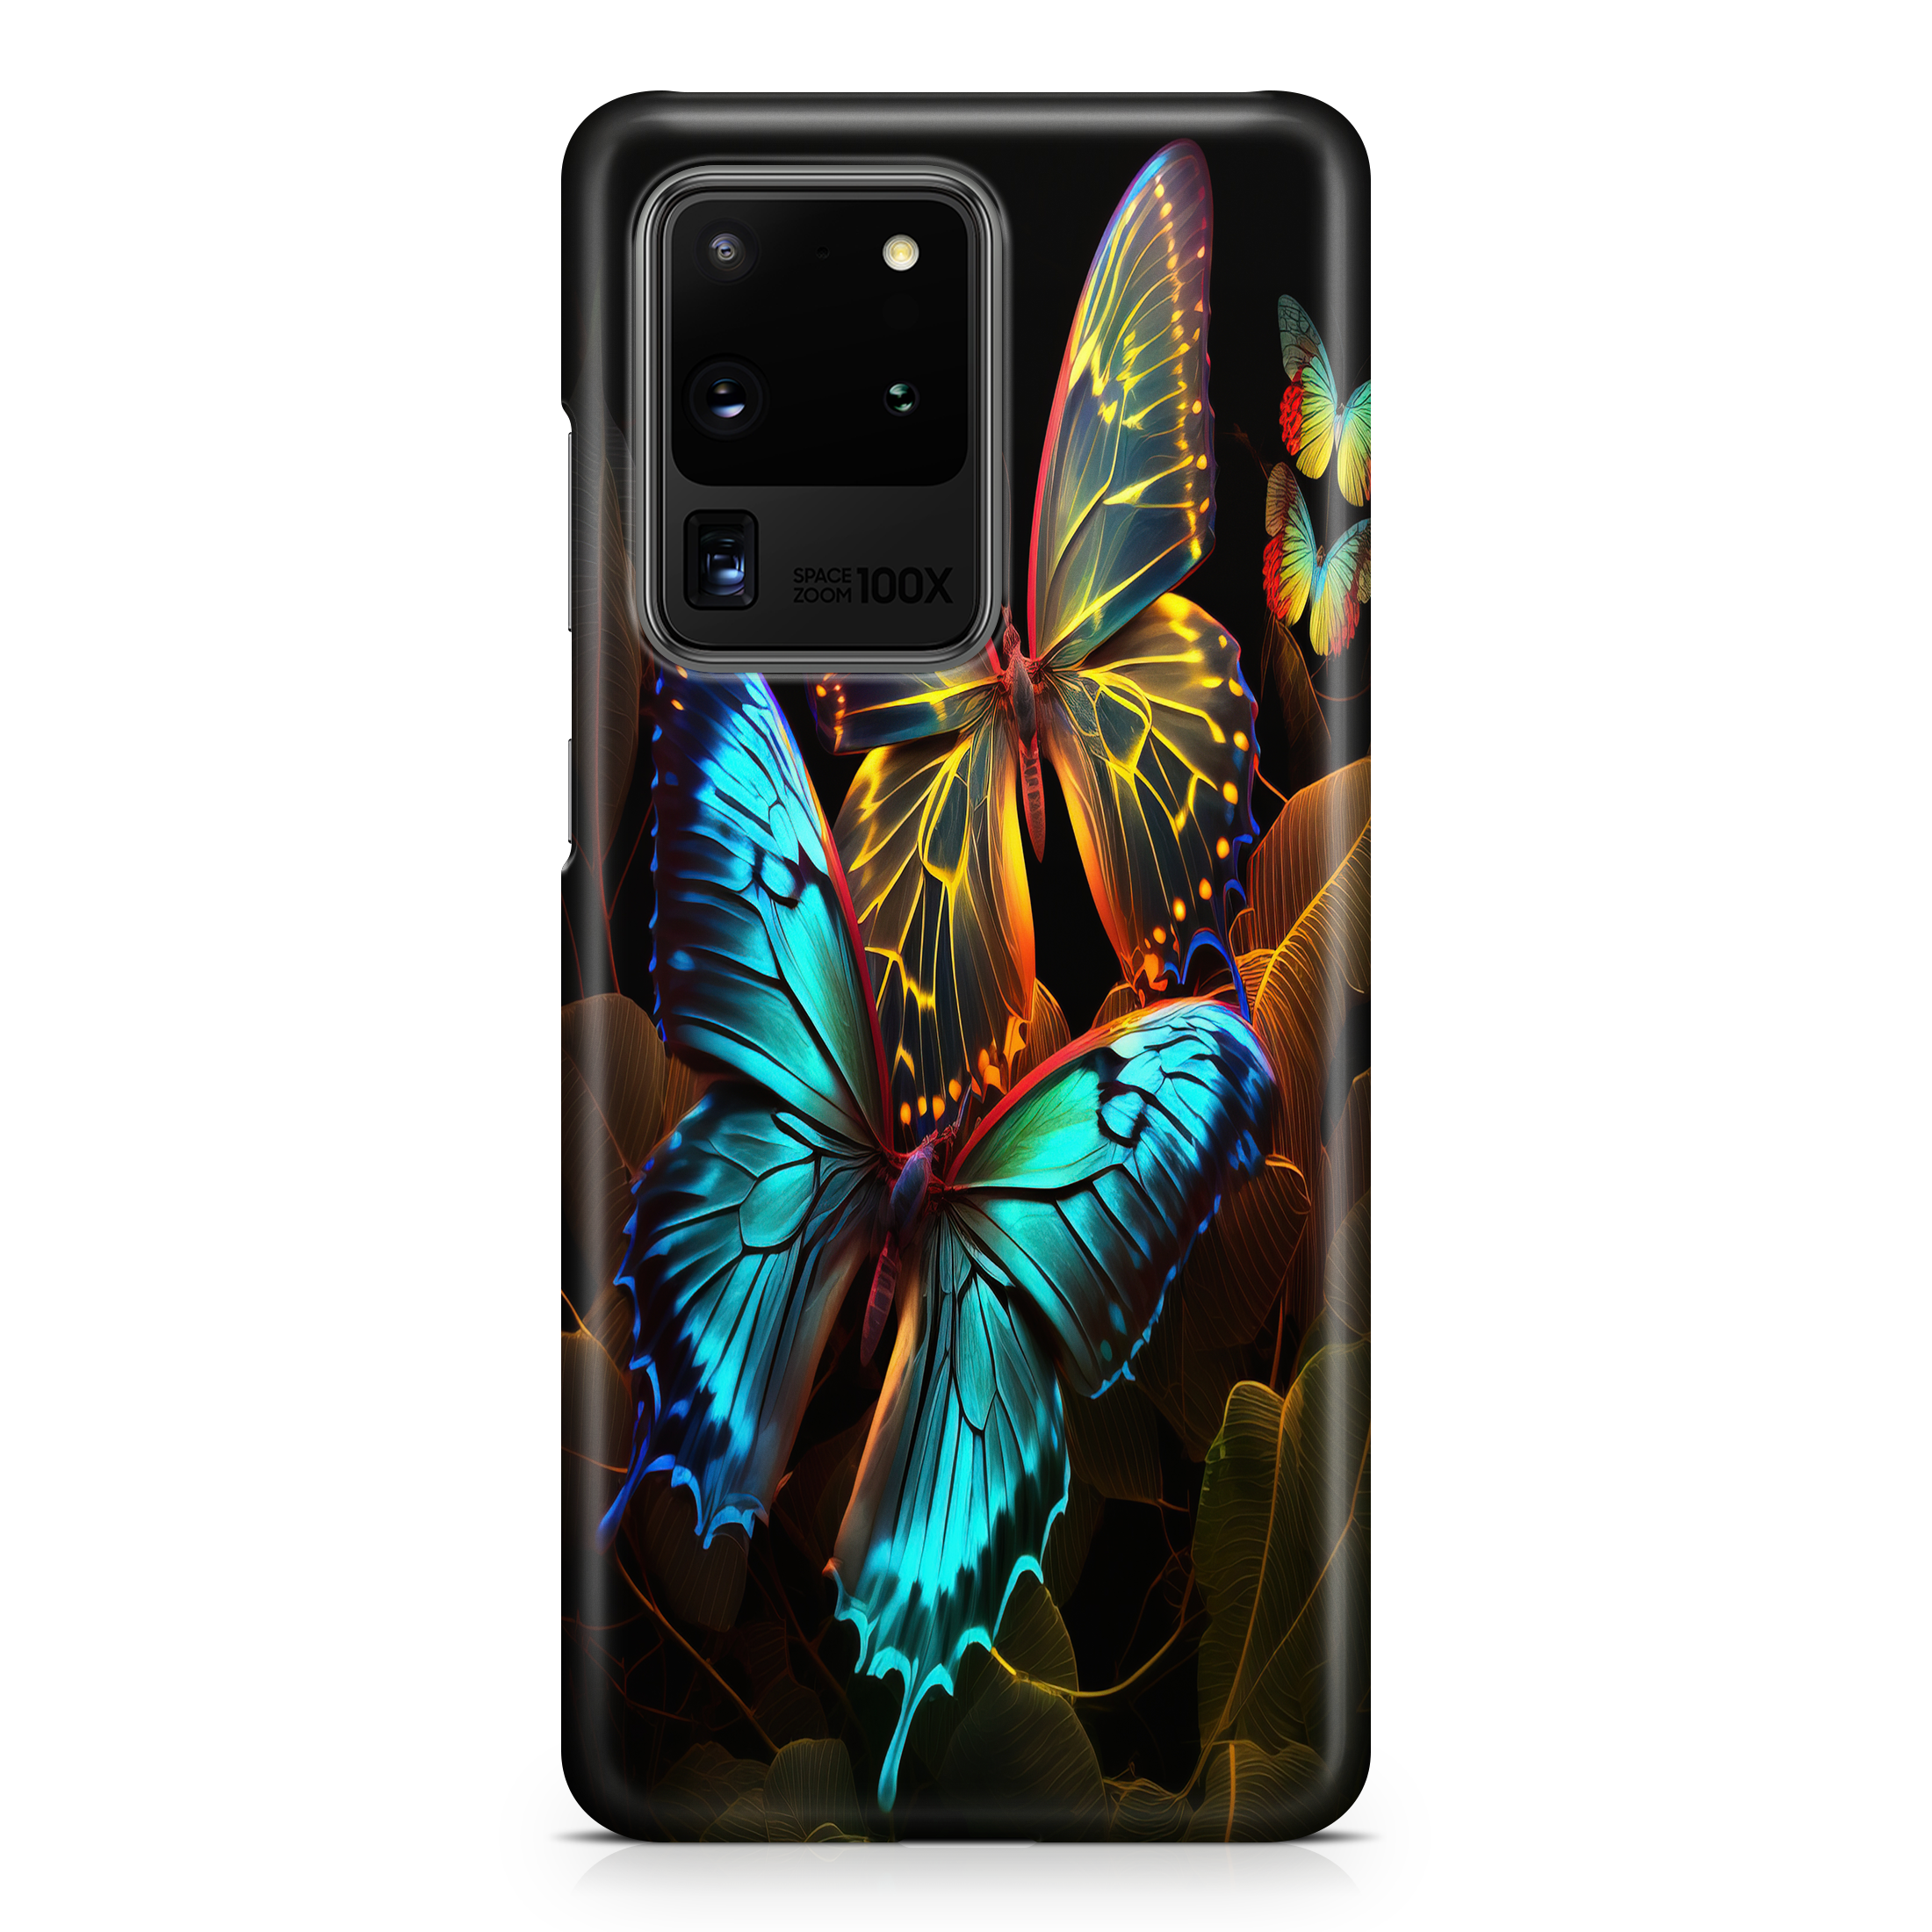 Specter Butterflies - Samsung phone case designs by CaseSwagger